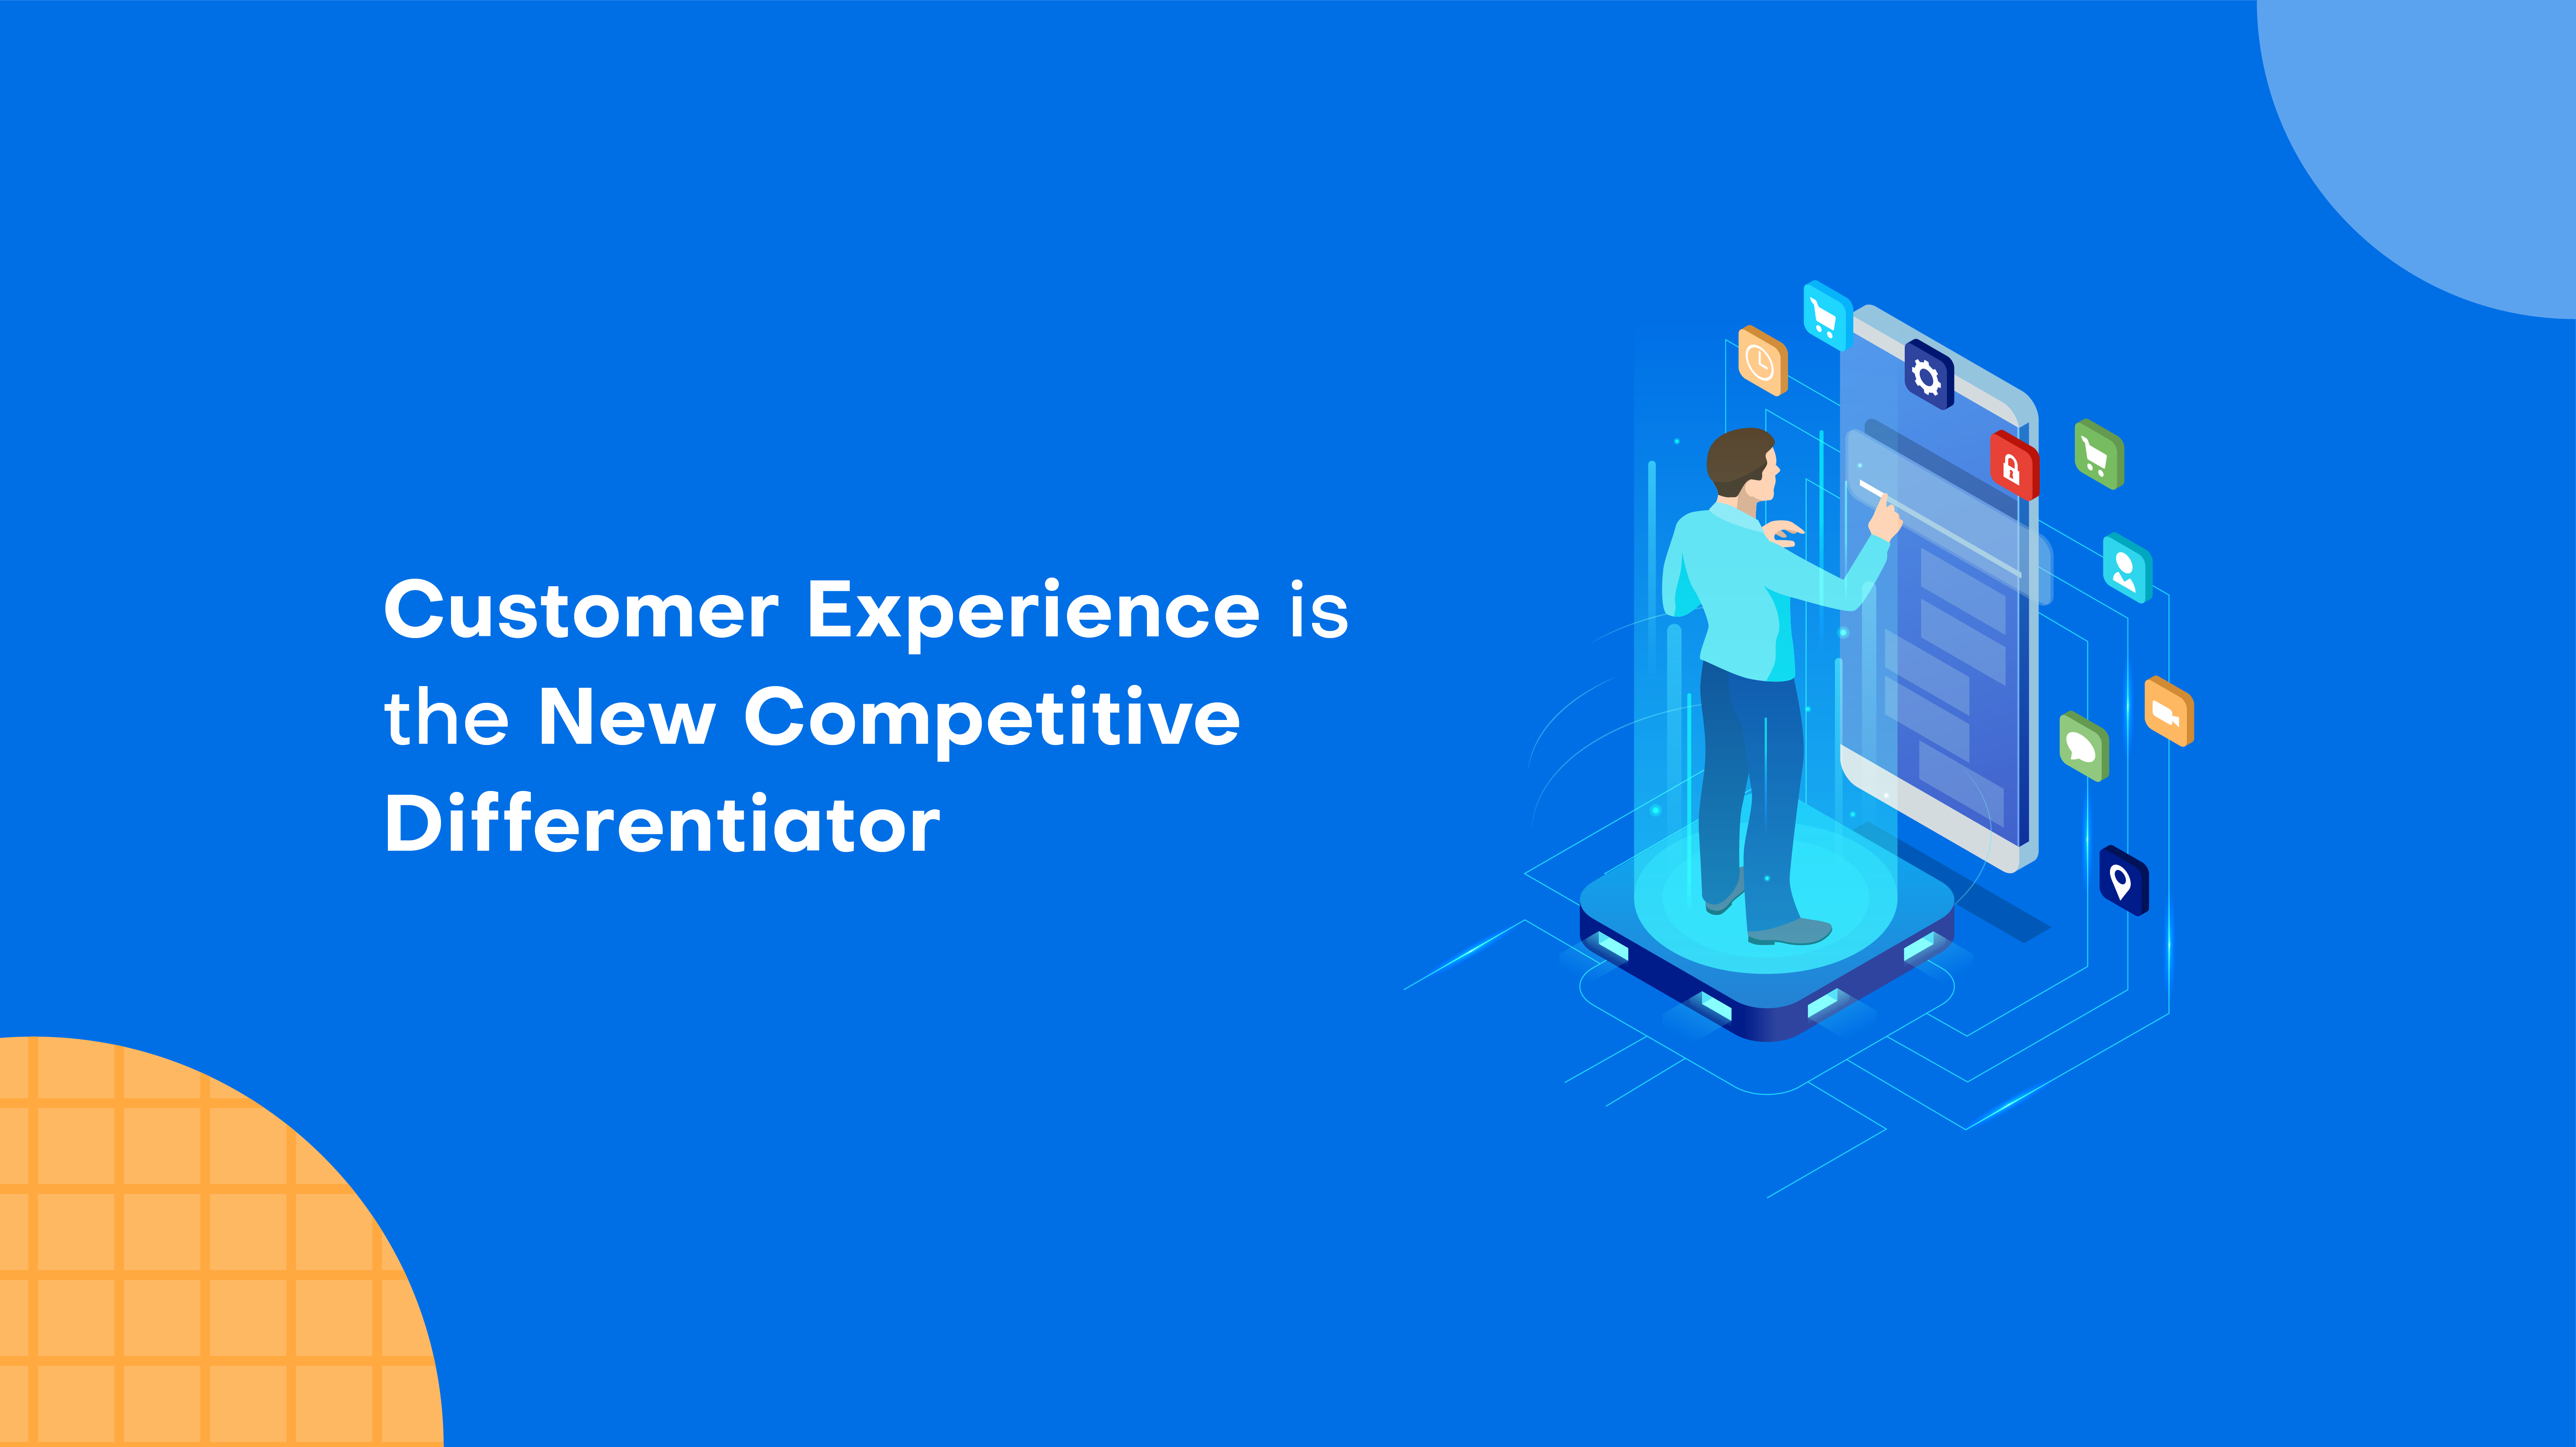 CX is the new competitive differentiator